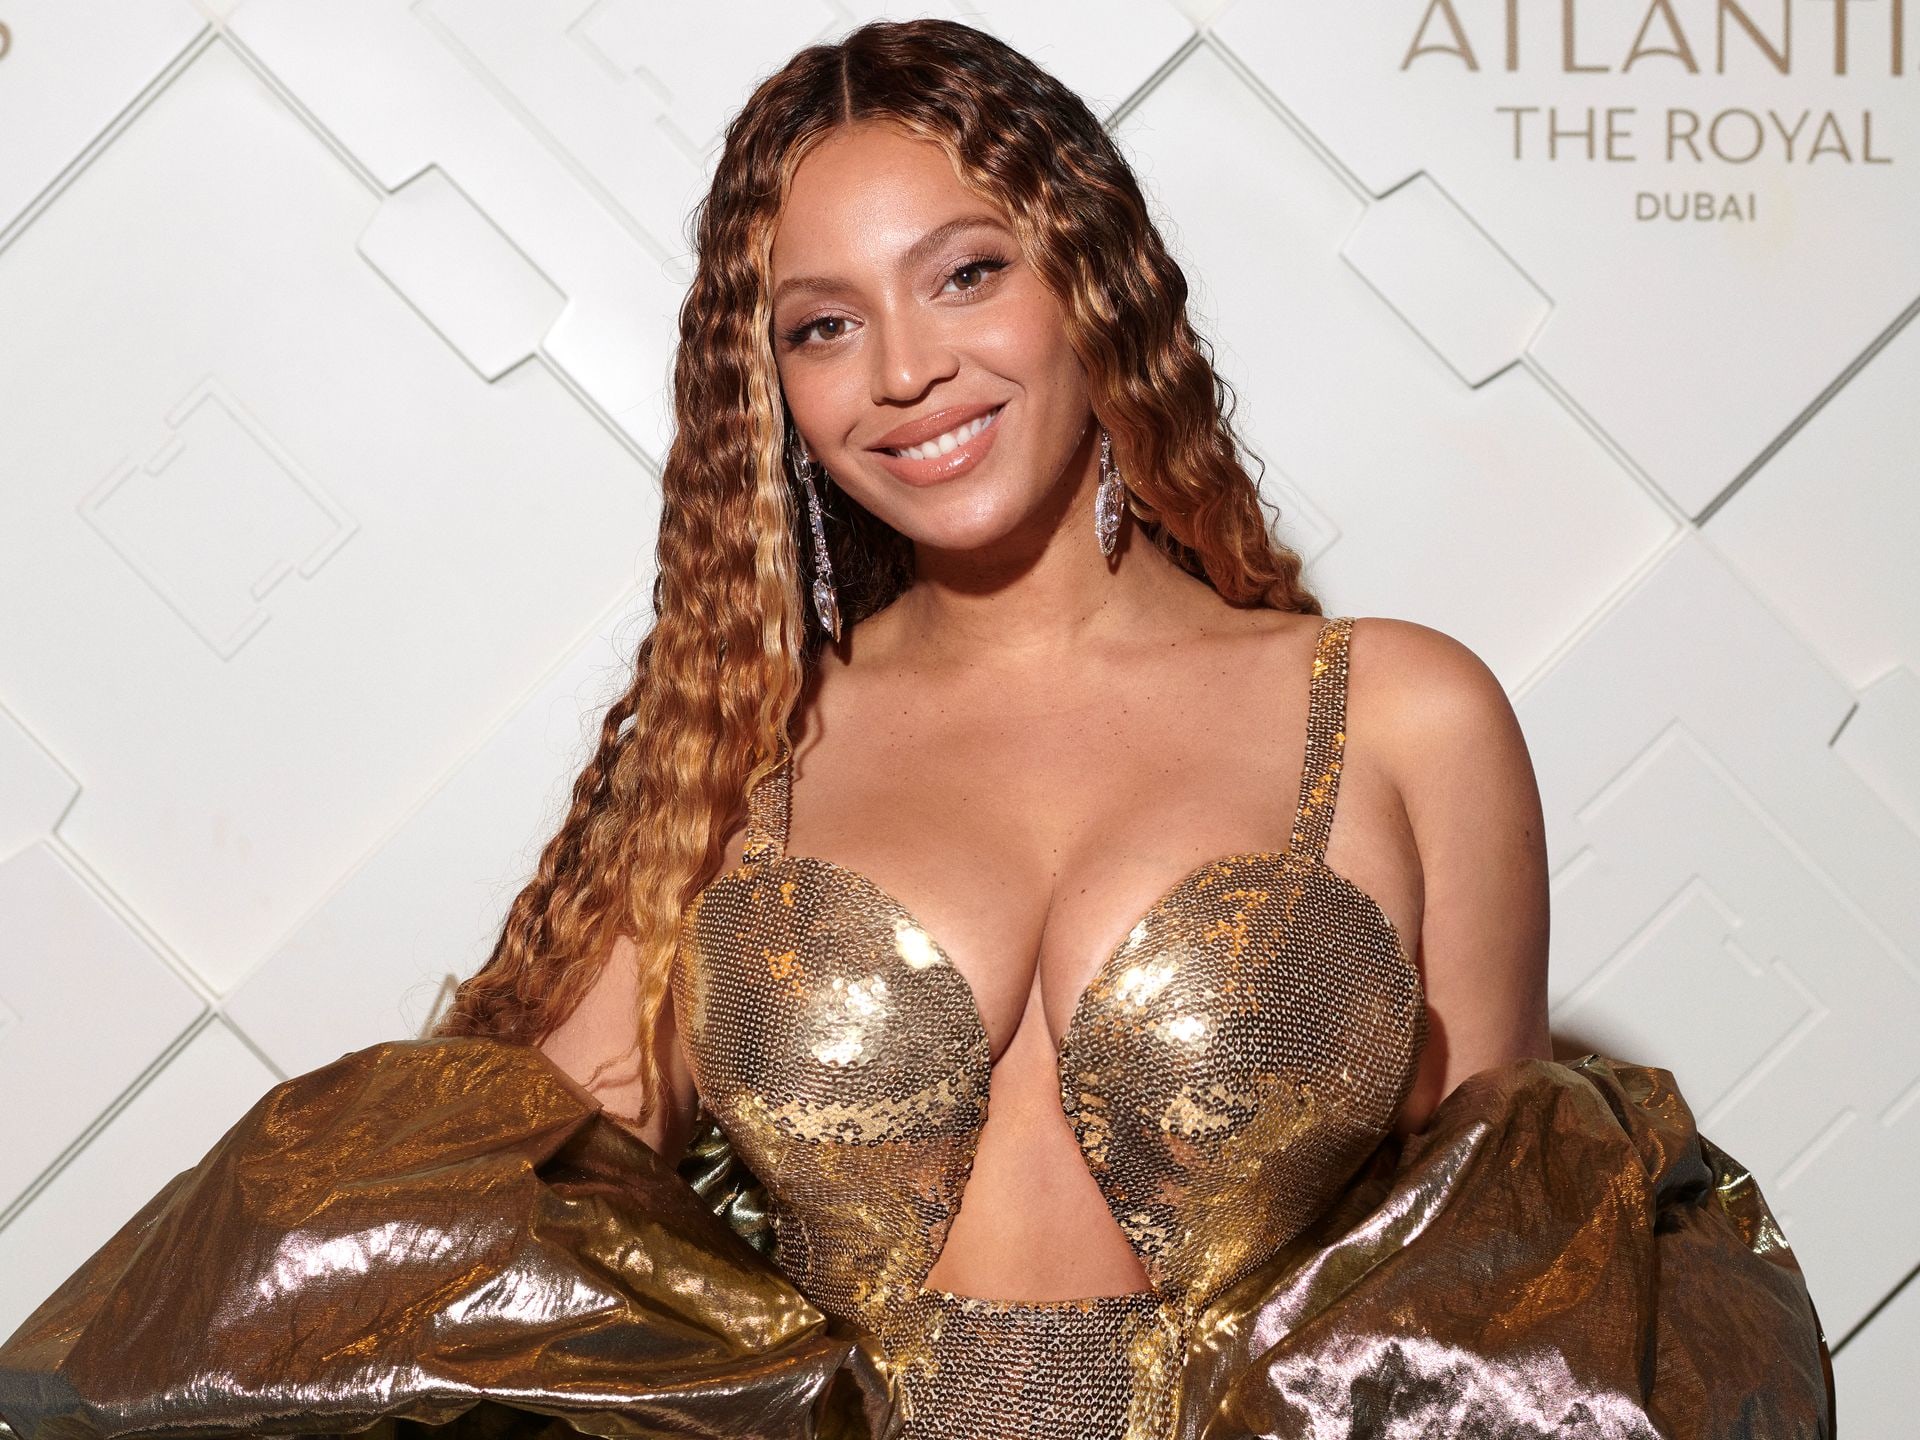 Beyoncé dazzles in show-stopping dress with impossibly high slit and  fishnet tights for latest Renaissance concert